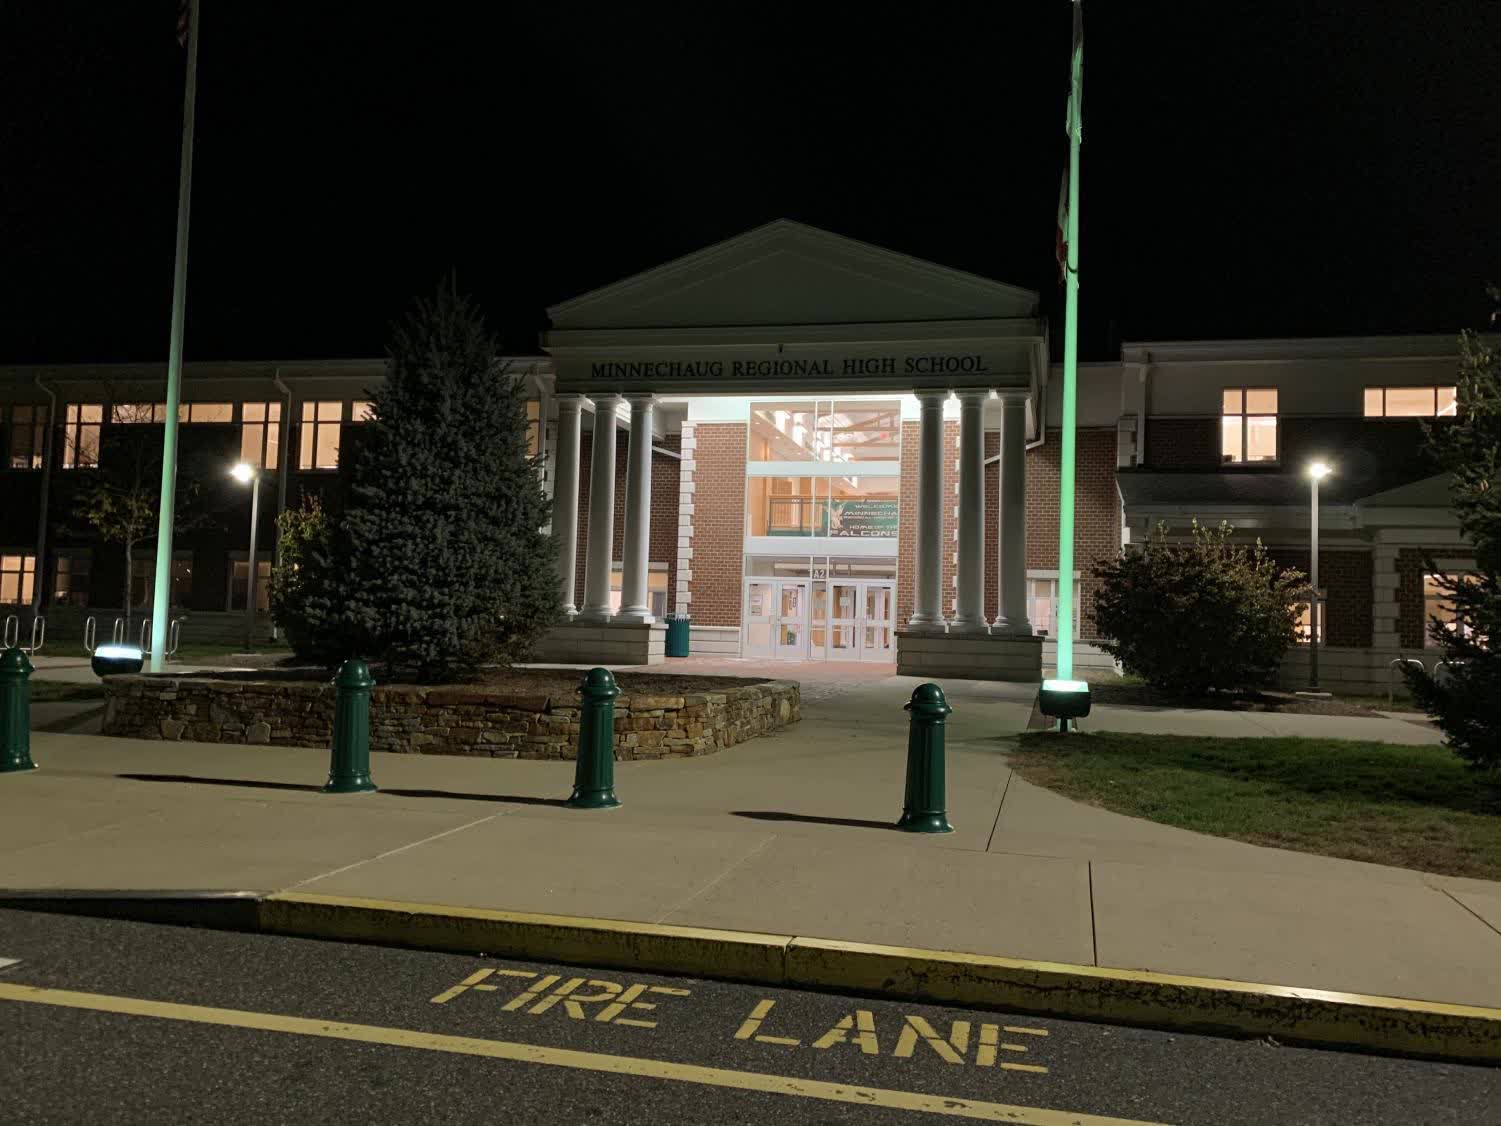 A software glitch has left a high school's lights on for over a year